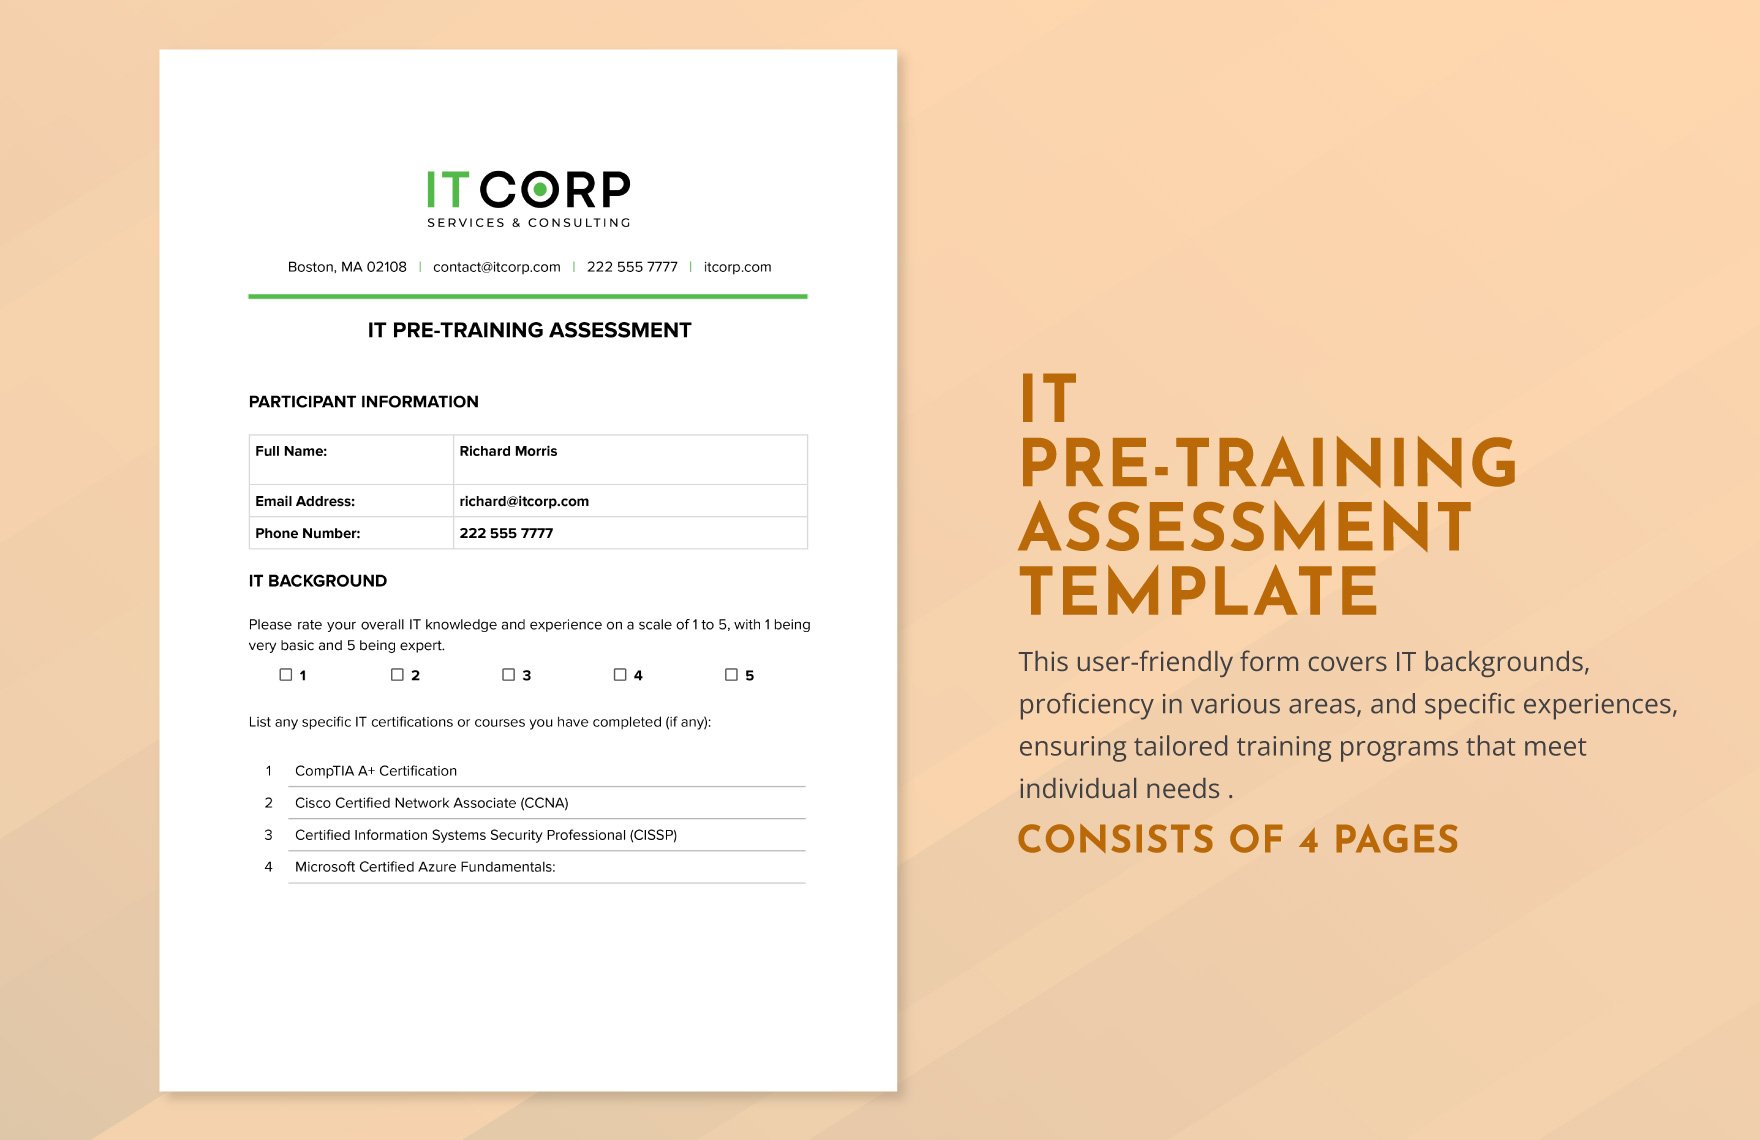 IT Pre-training Assessment Template